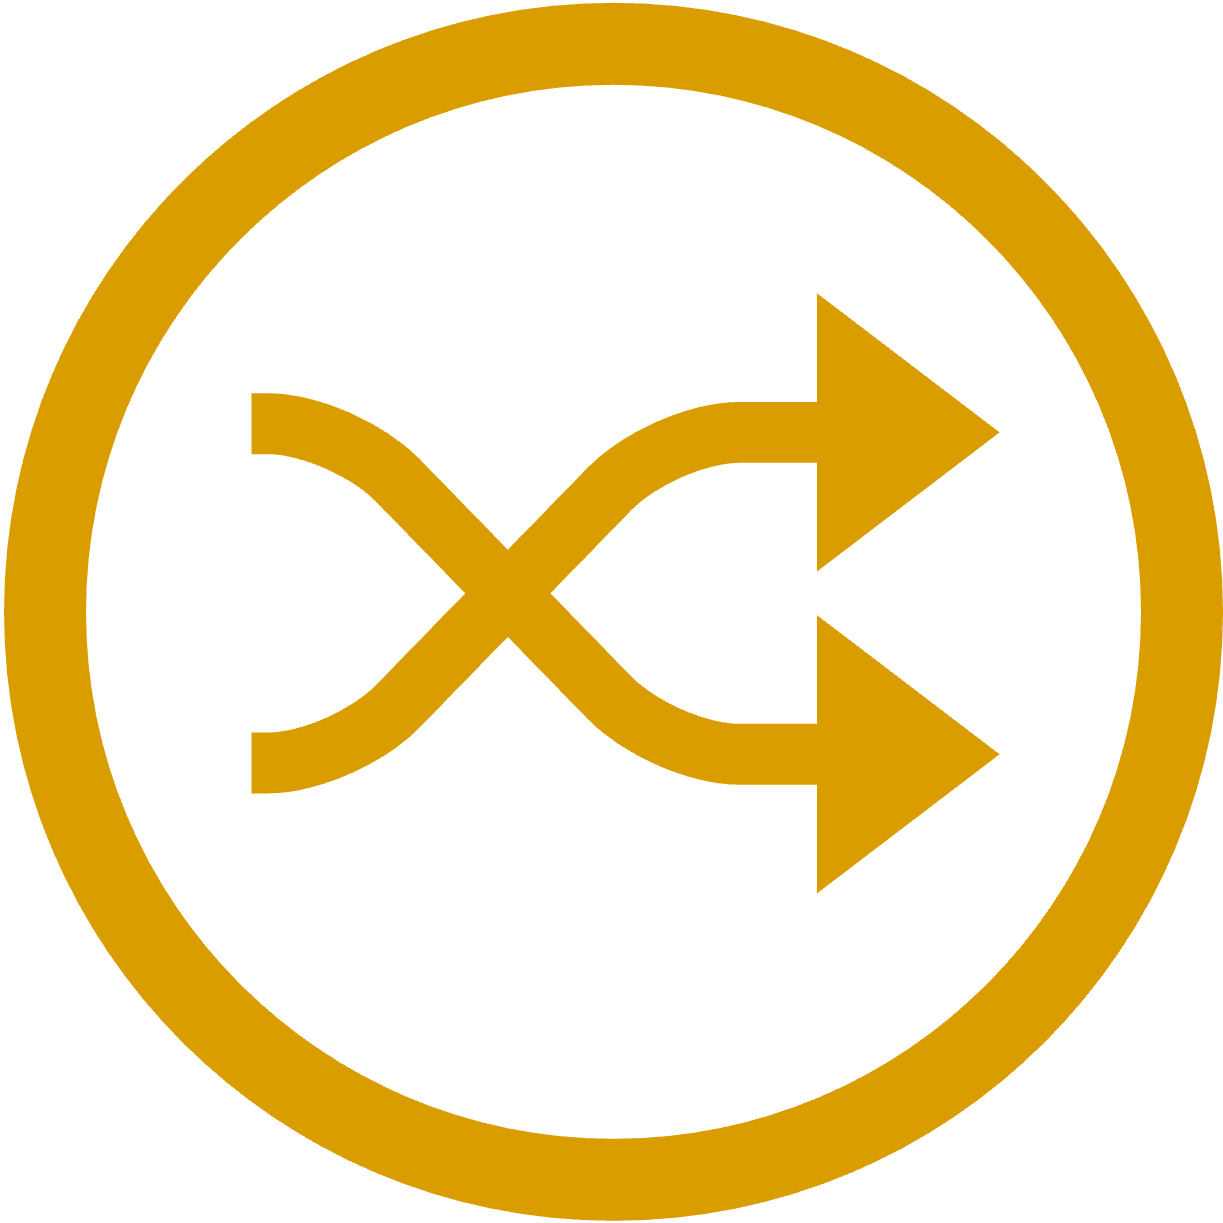 Icon: Circle with two crossing arrows inside